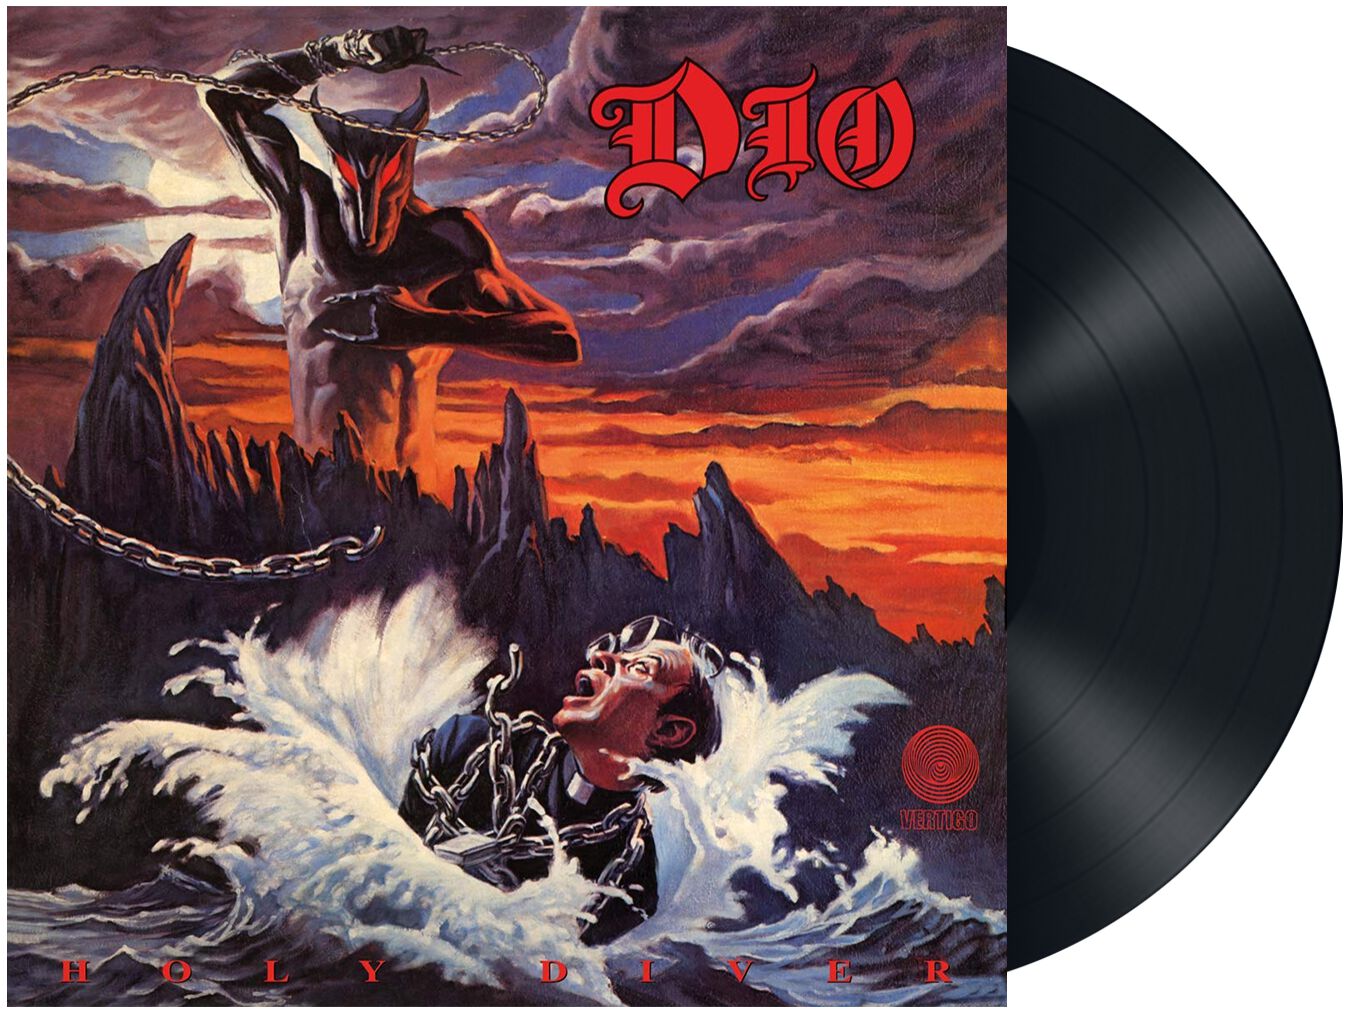 Image of Dio Holy diver LP Standard